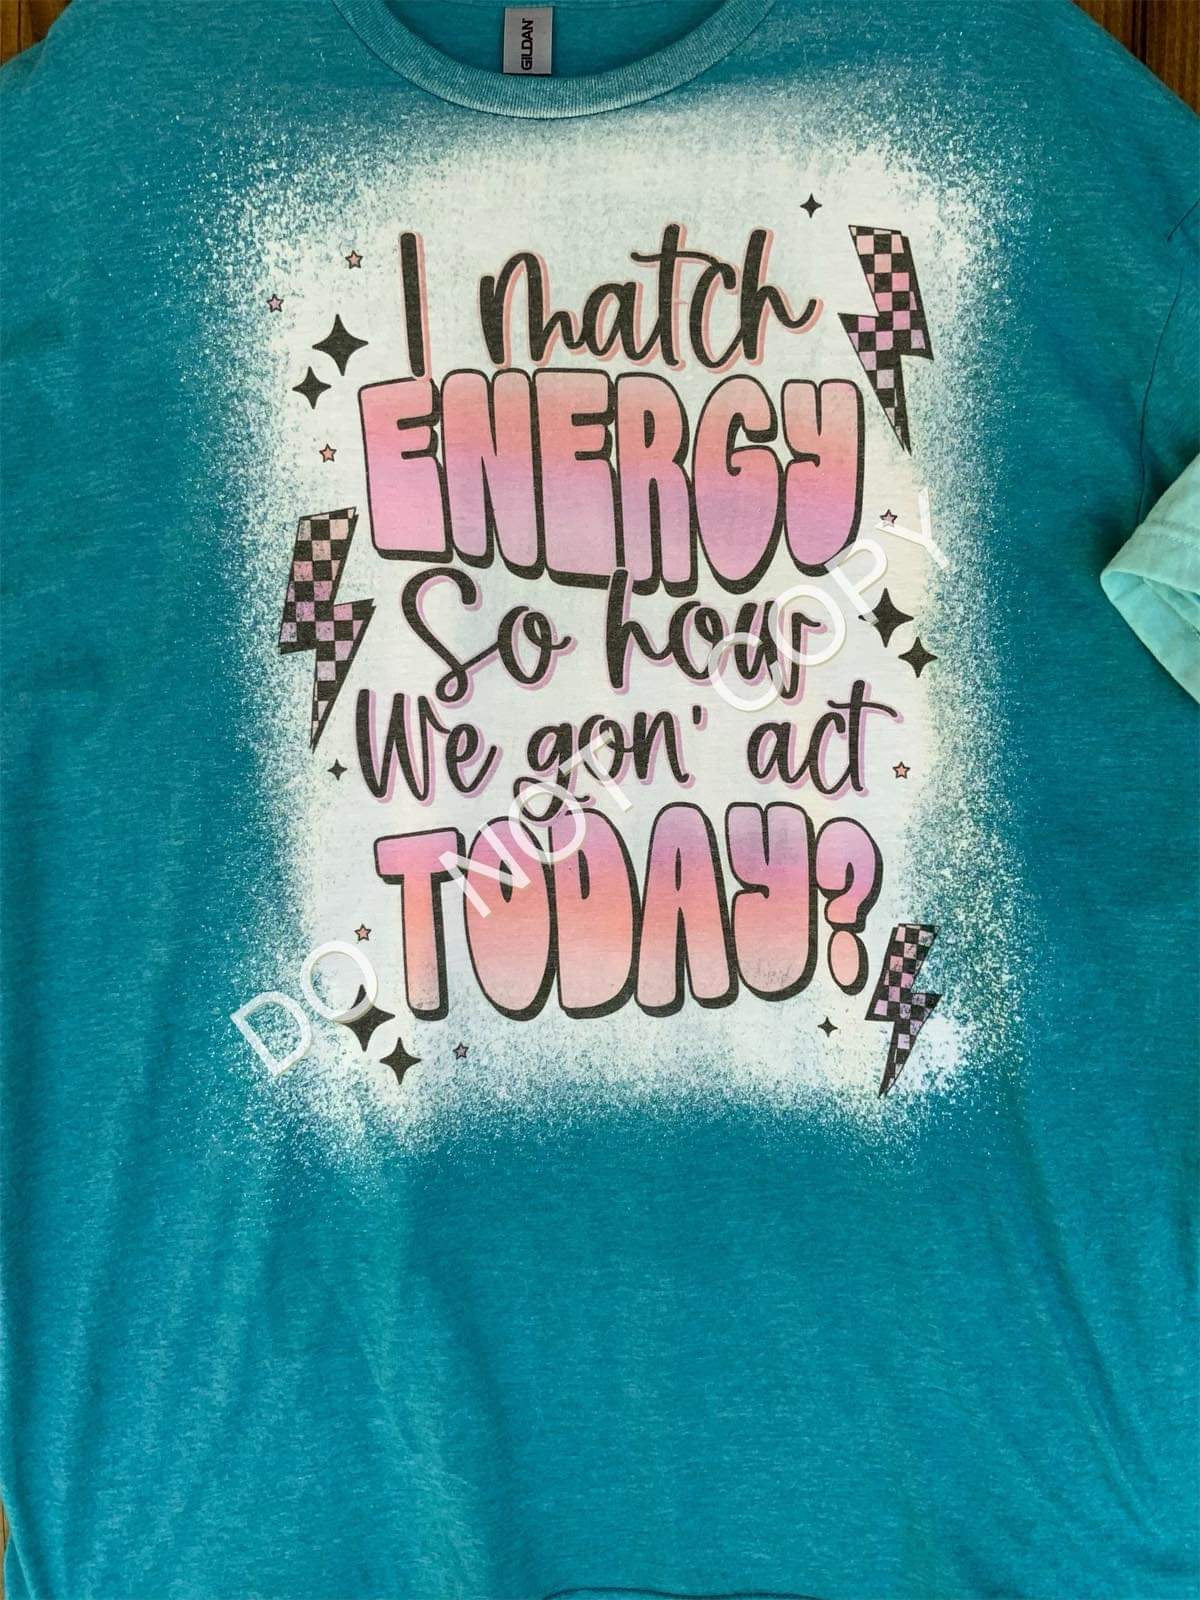 I match energy so how we gon act today?   2 - BLEACHED TSHIRT